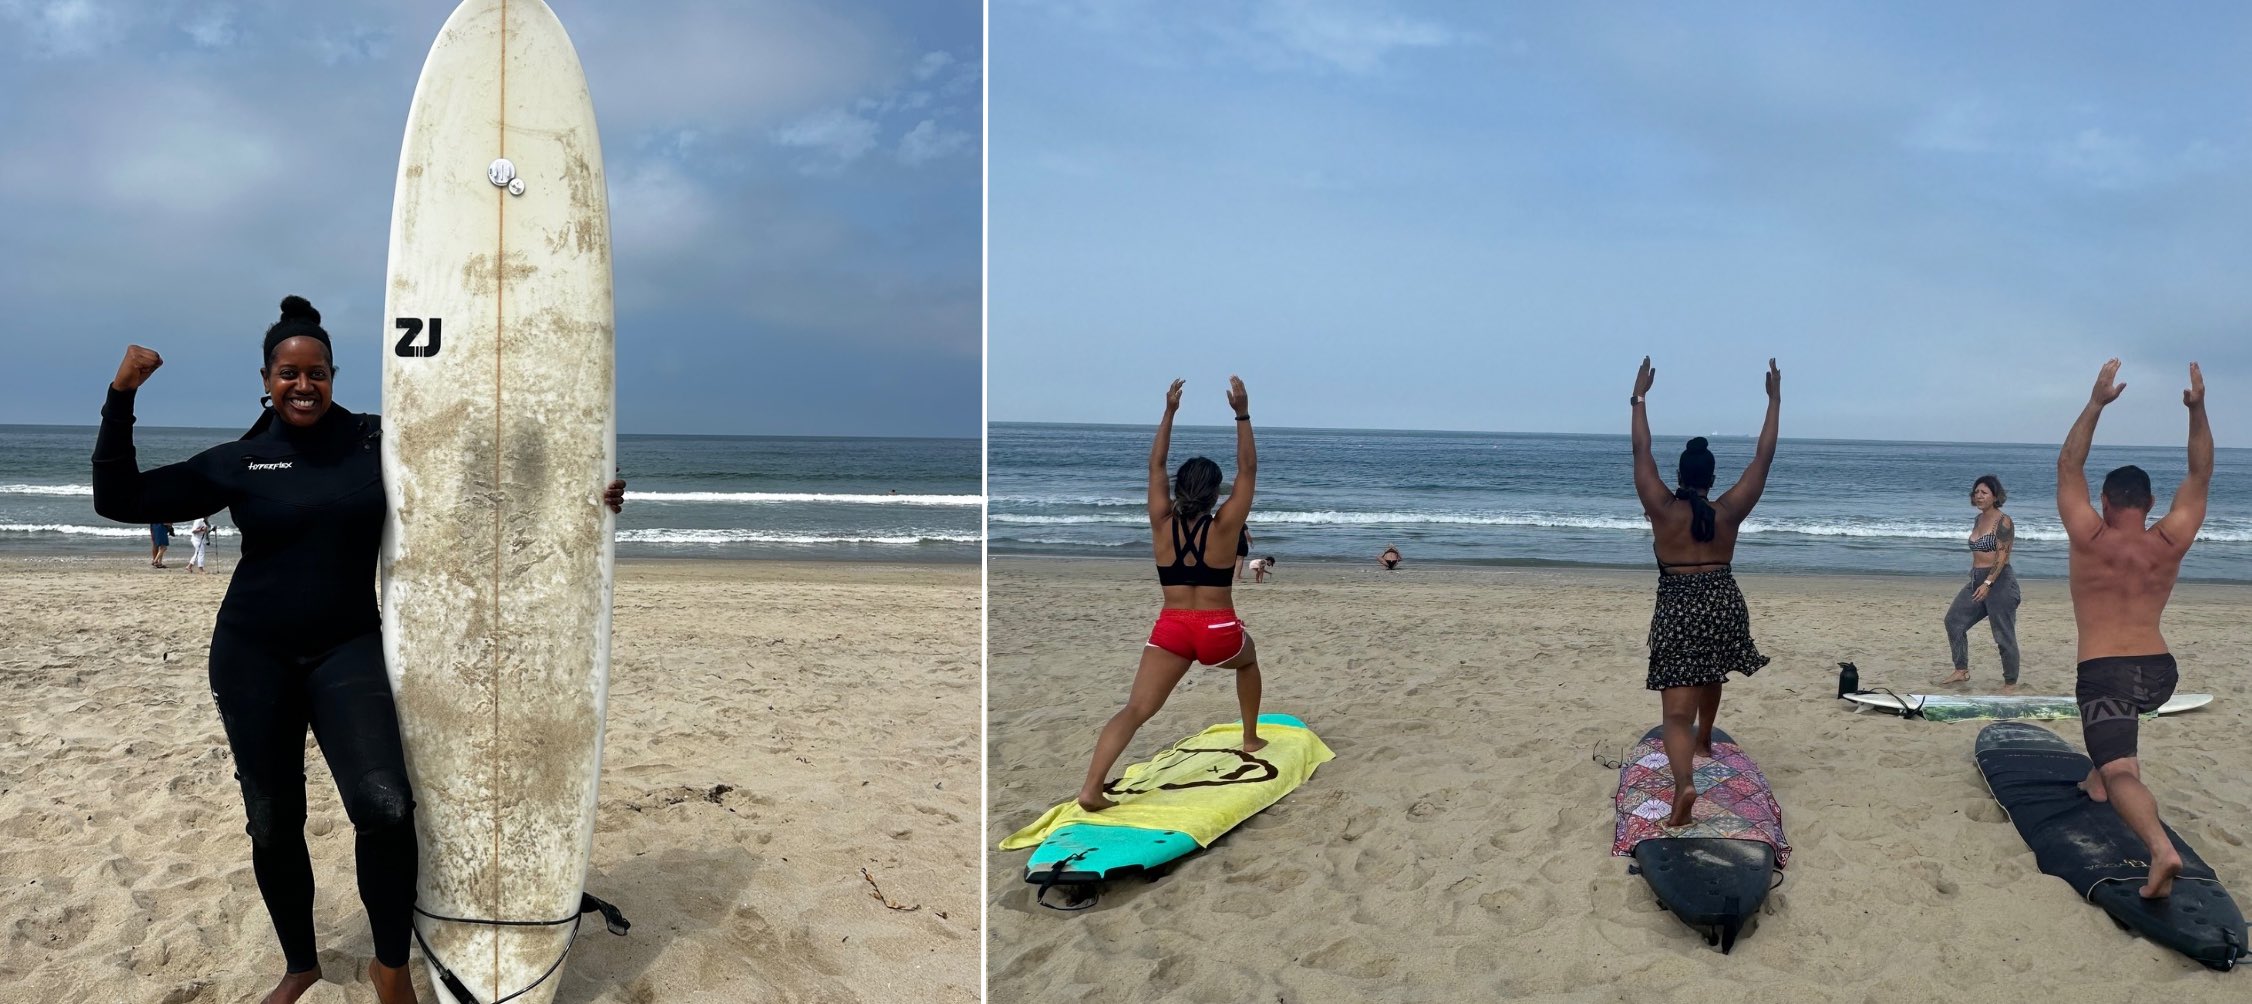 Beach Yoga and Surfing at Happy Yoga’s Beach Sessions